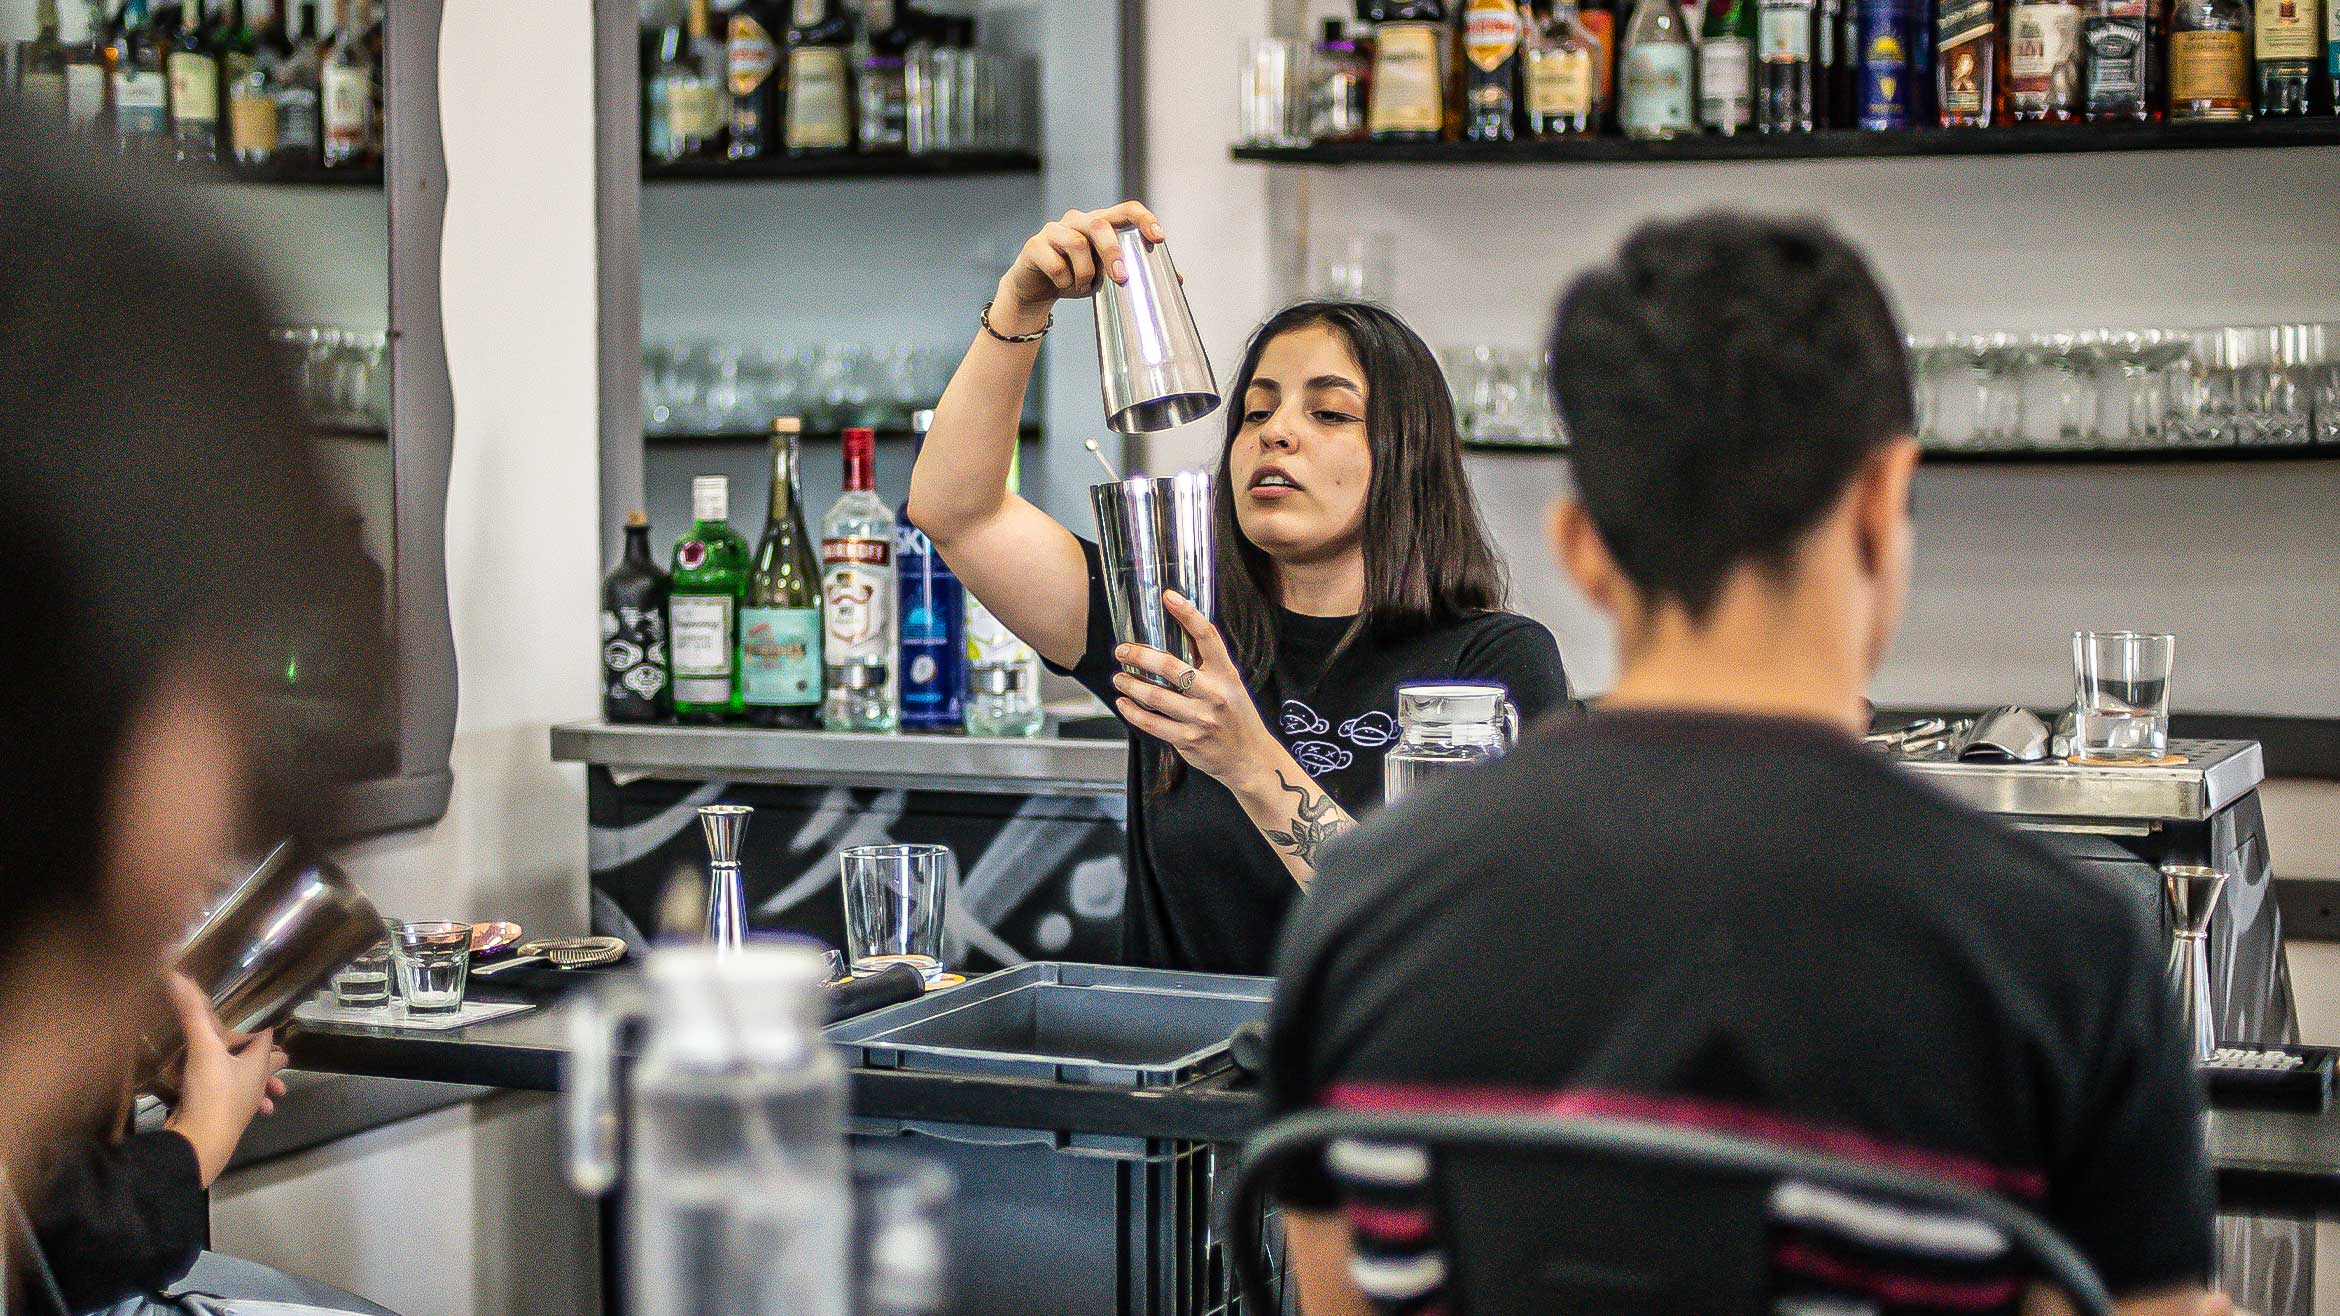 Tres Monos Isn’t Just One of Buenos Aires’ Best Bars, It’s Also a One-of-a-Kind Bartending School